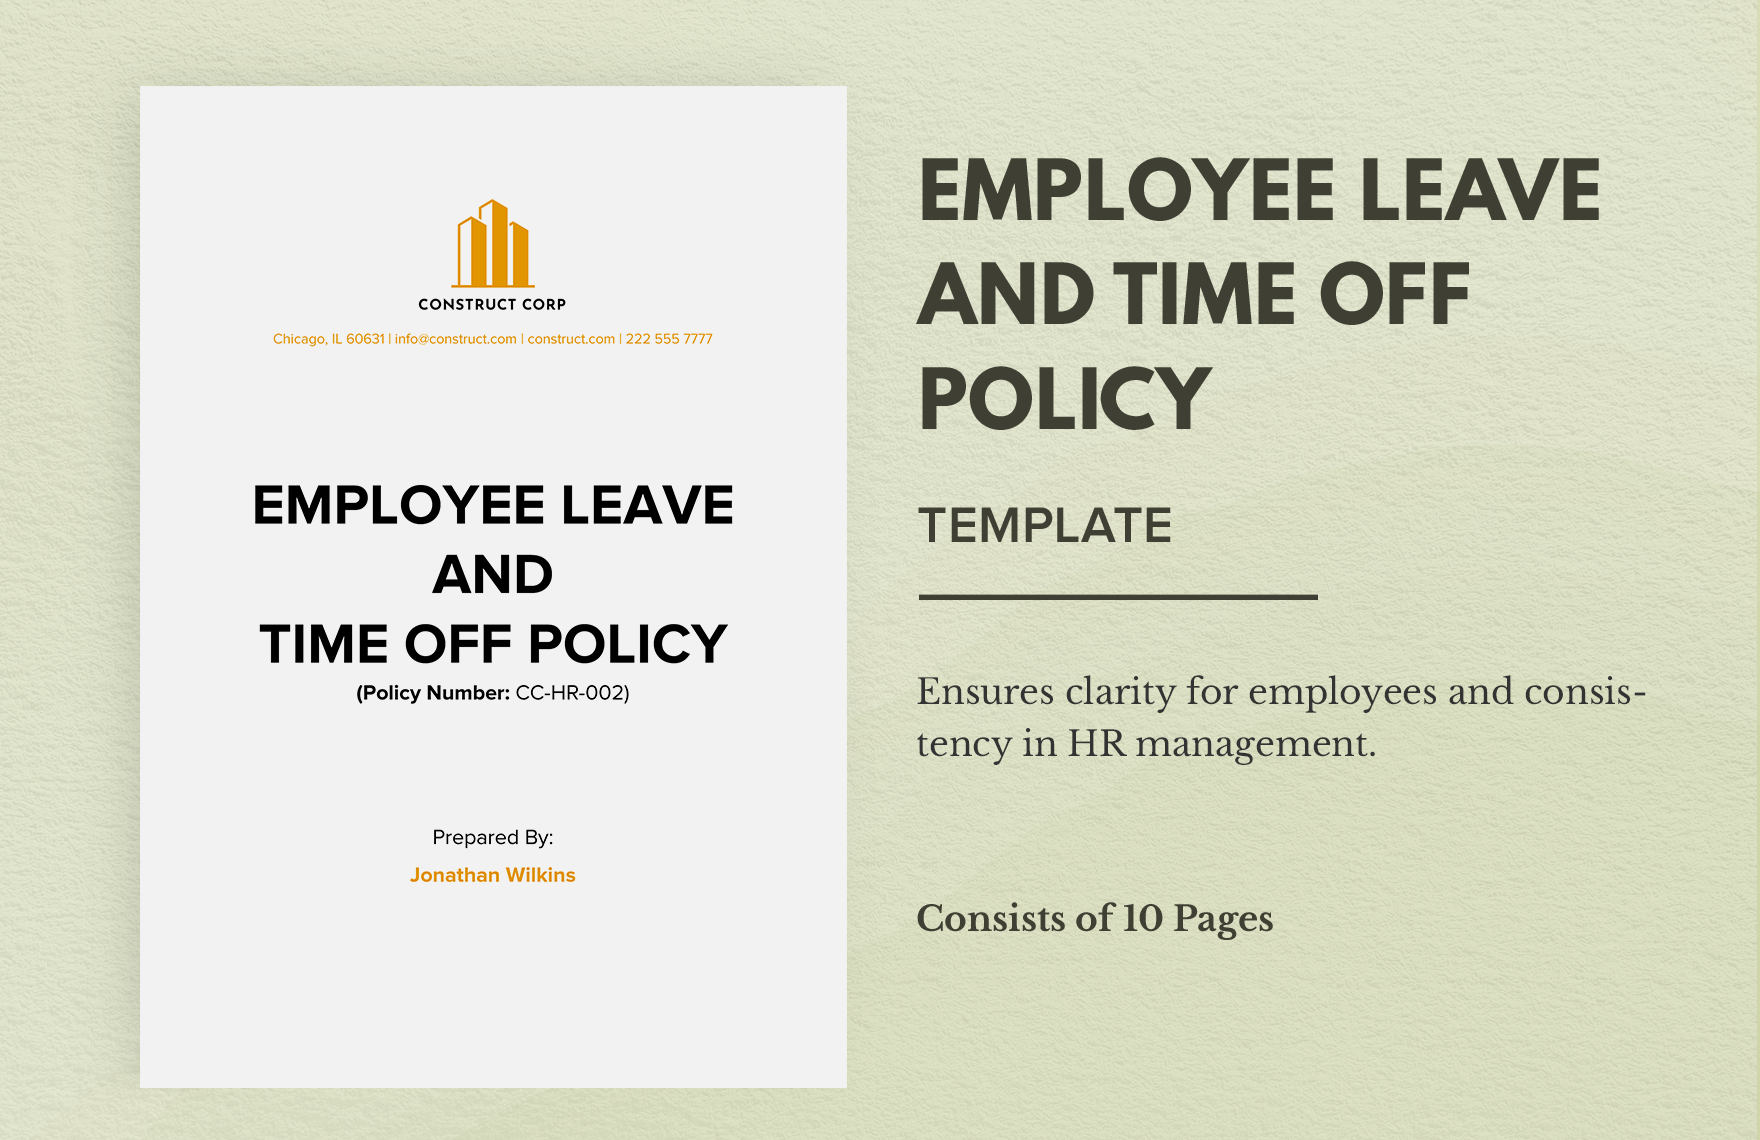 Employee Leave and Time Off Policy Template